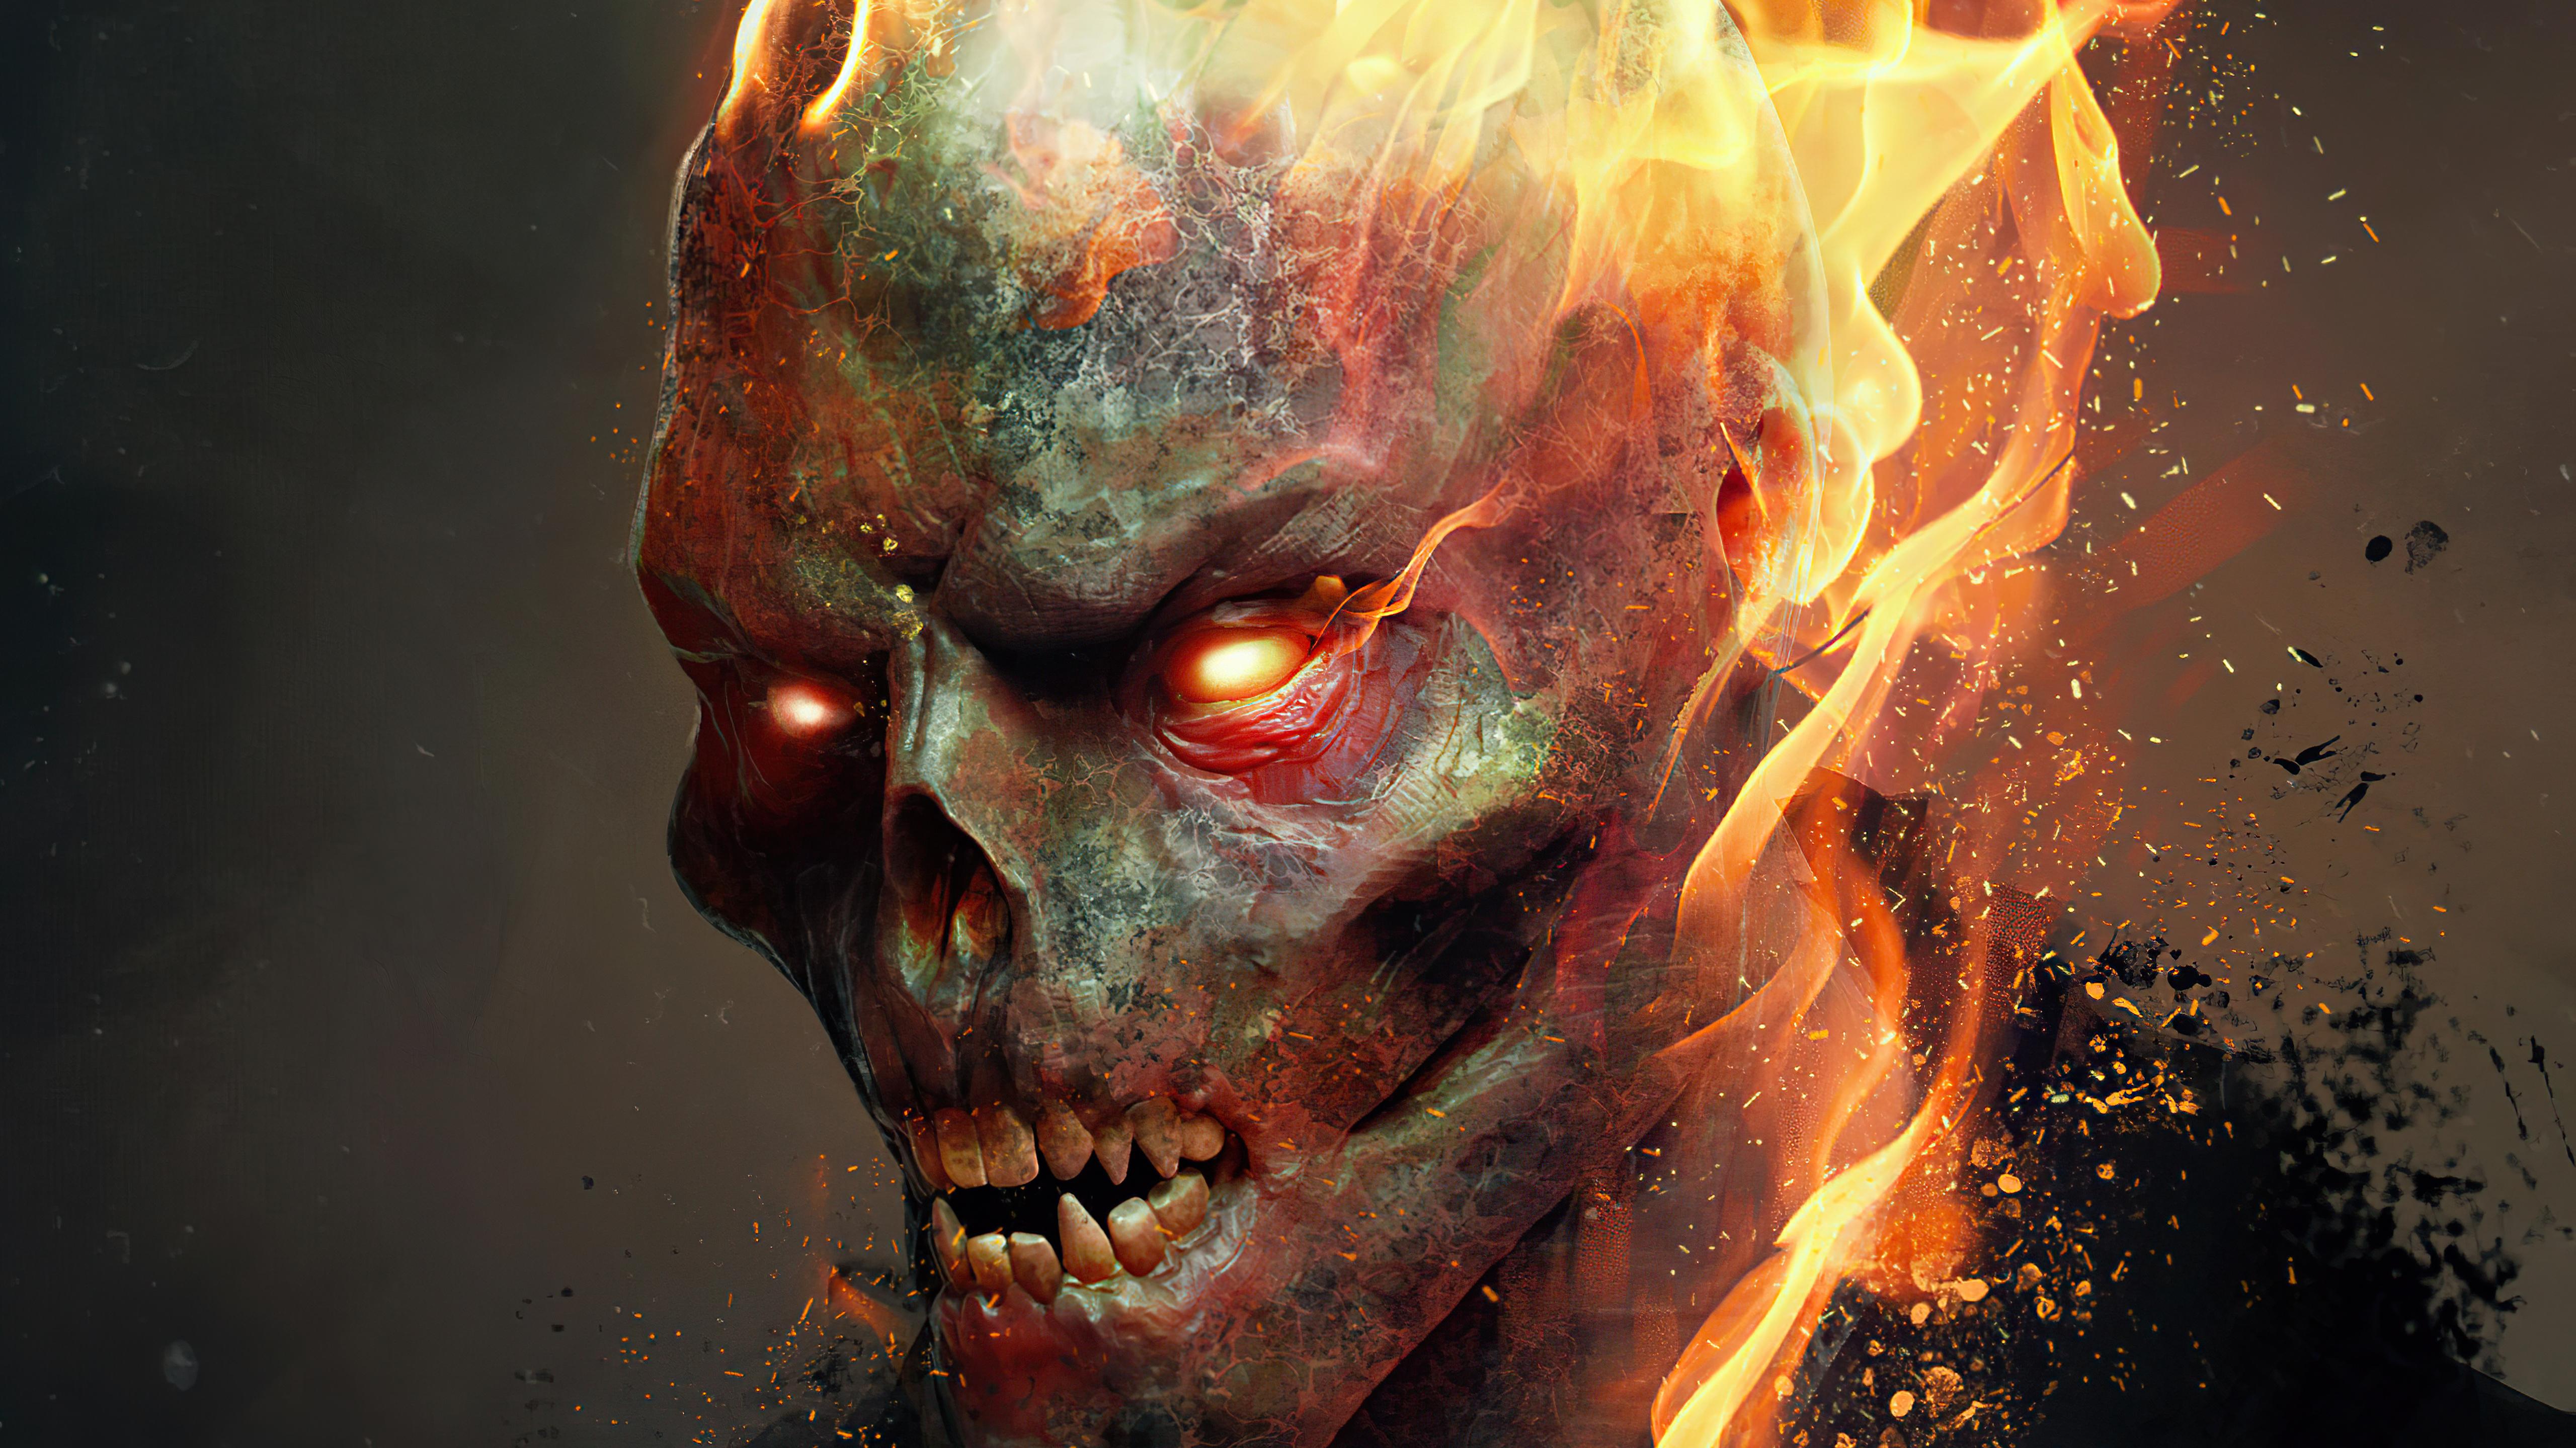 Ghost rider on fire 4K wallpaper download